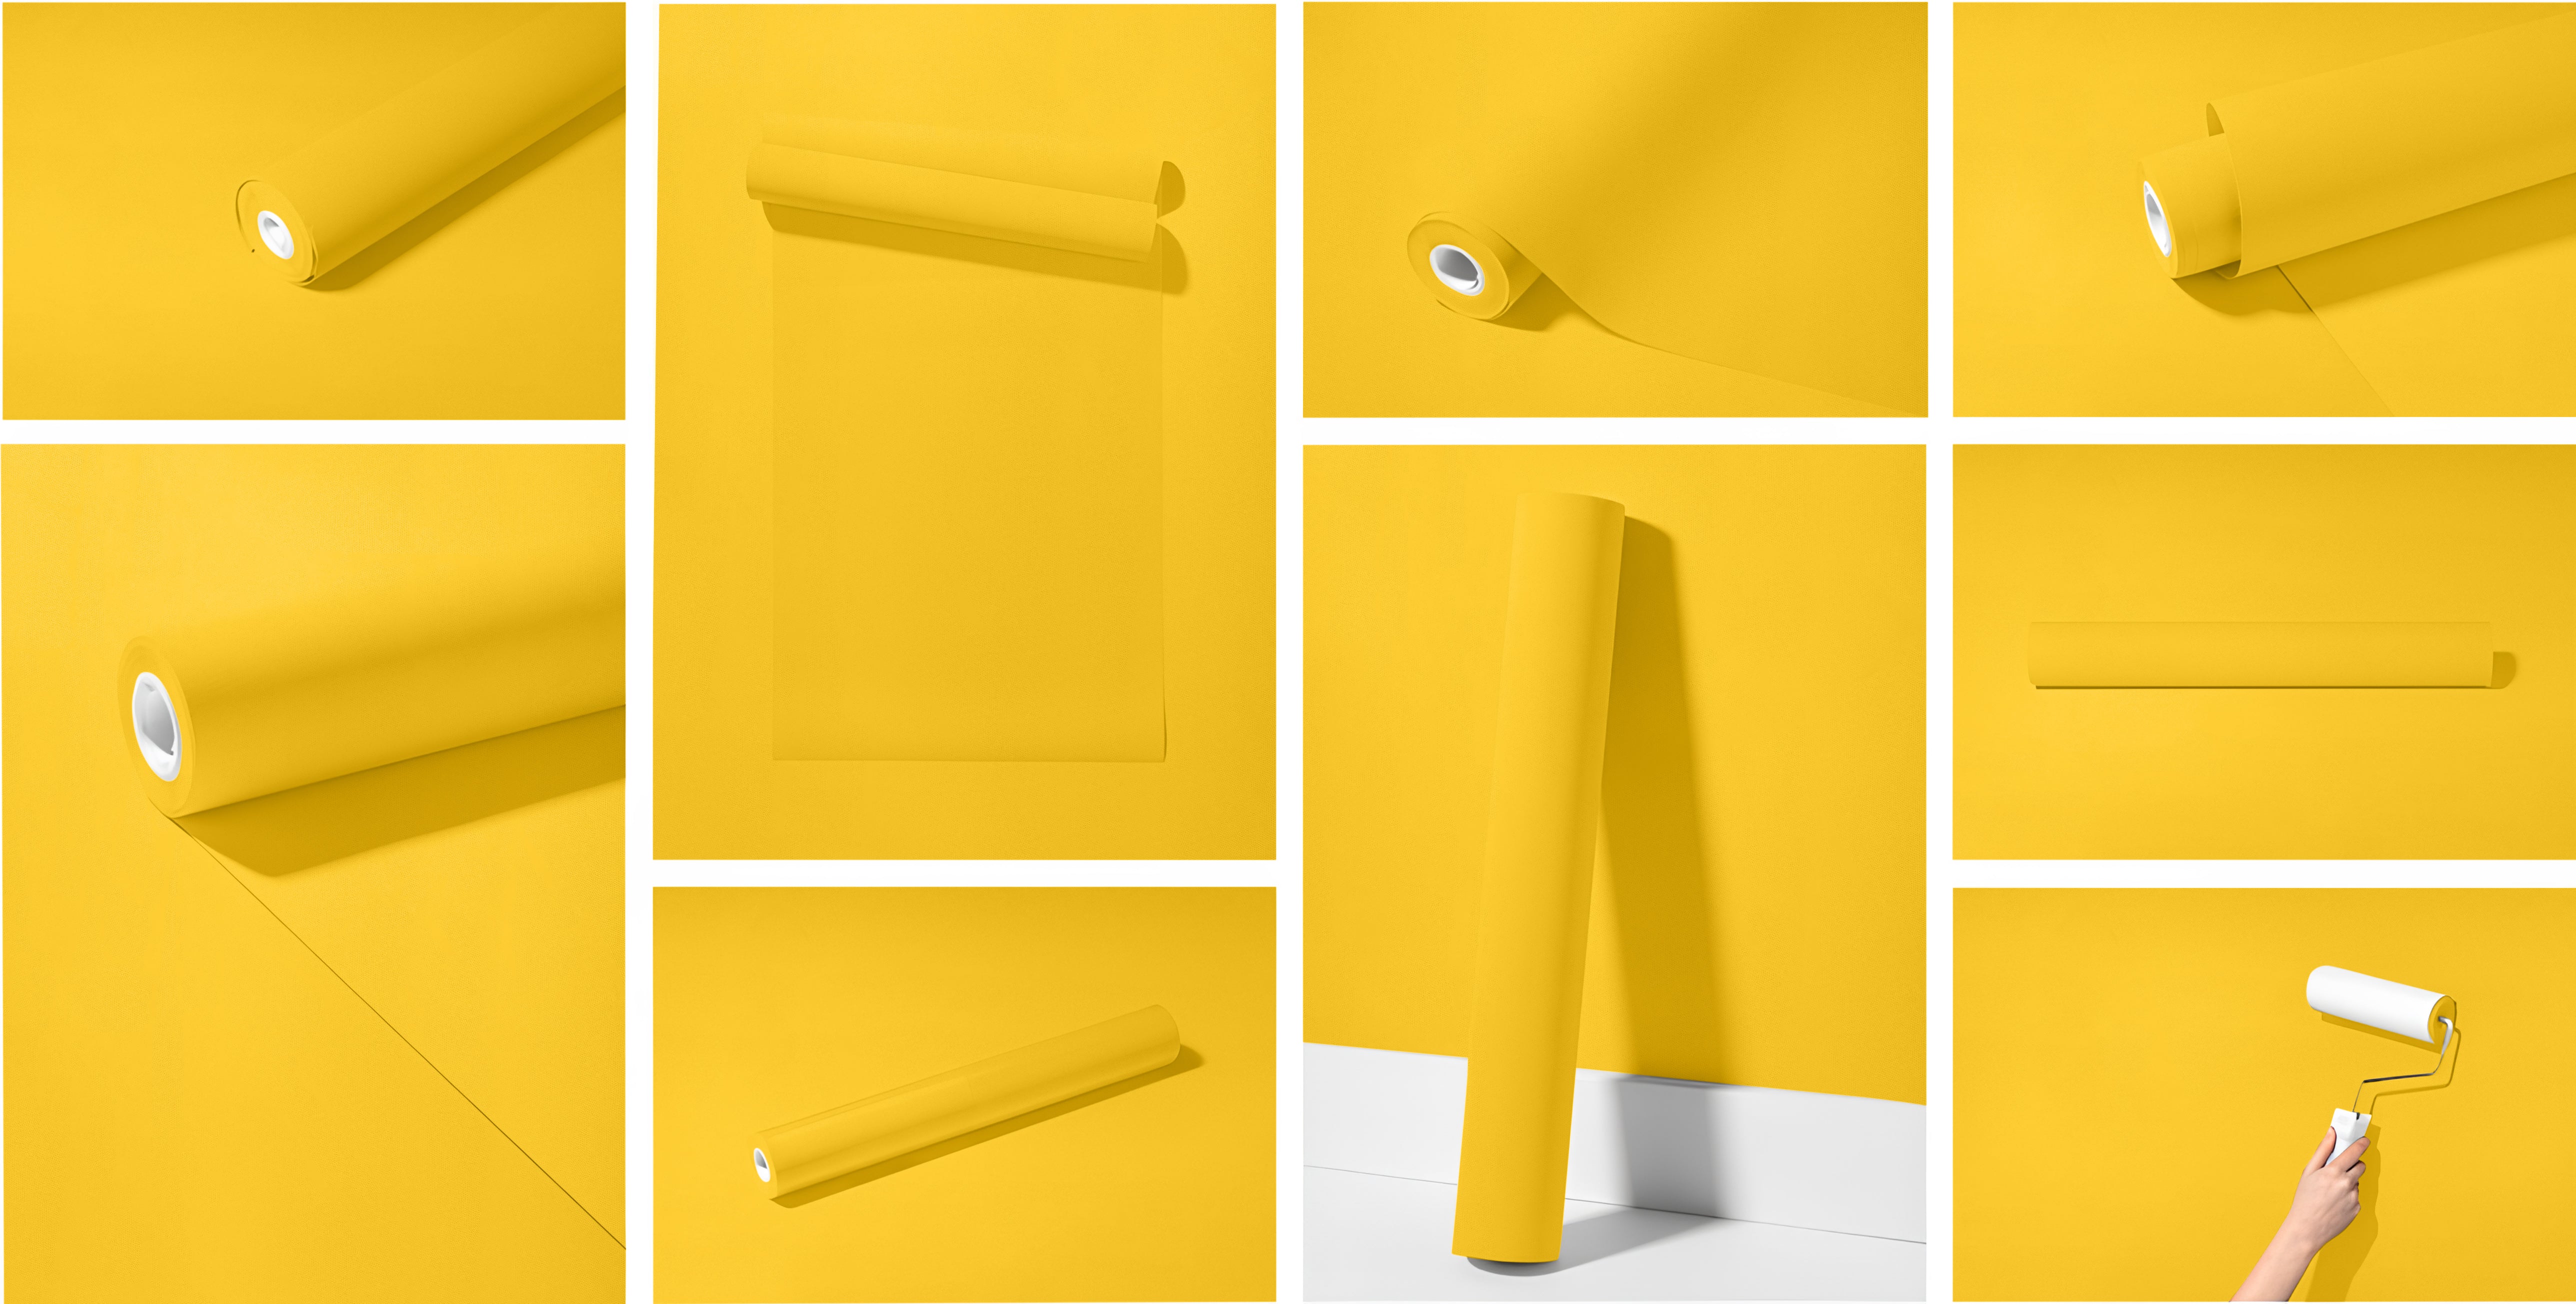 Peel & Stick Removable Re-usable Paint - Color RAL 1018 Zinc Yellow - offRAL™ - RALRAW LLC, USA